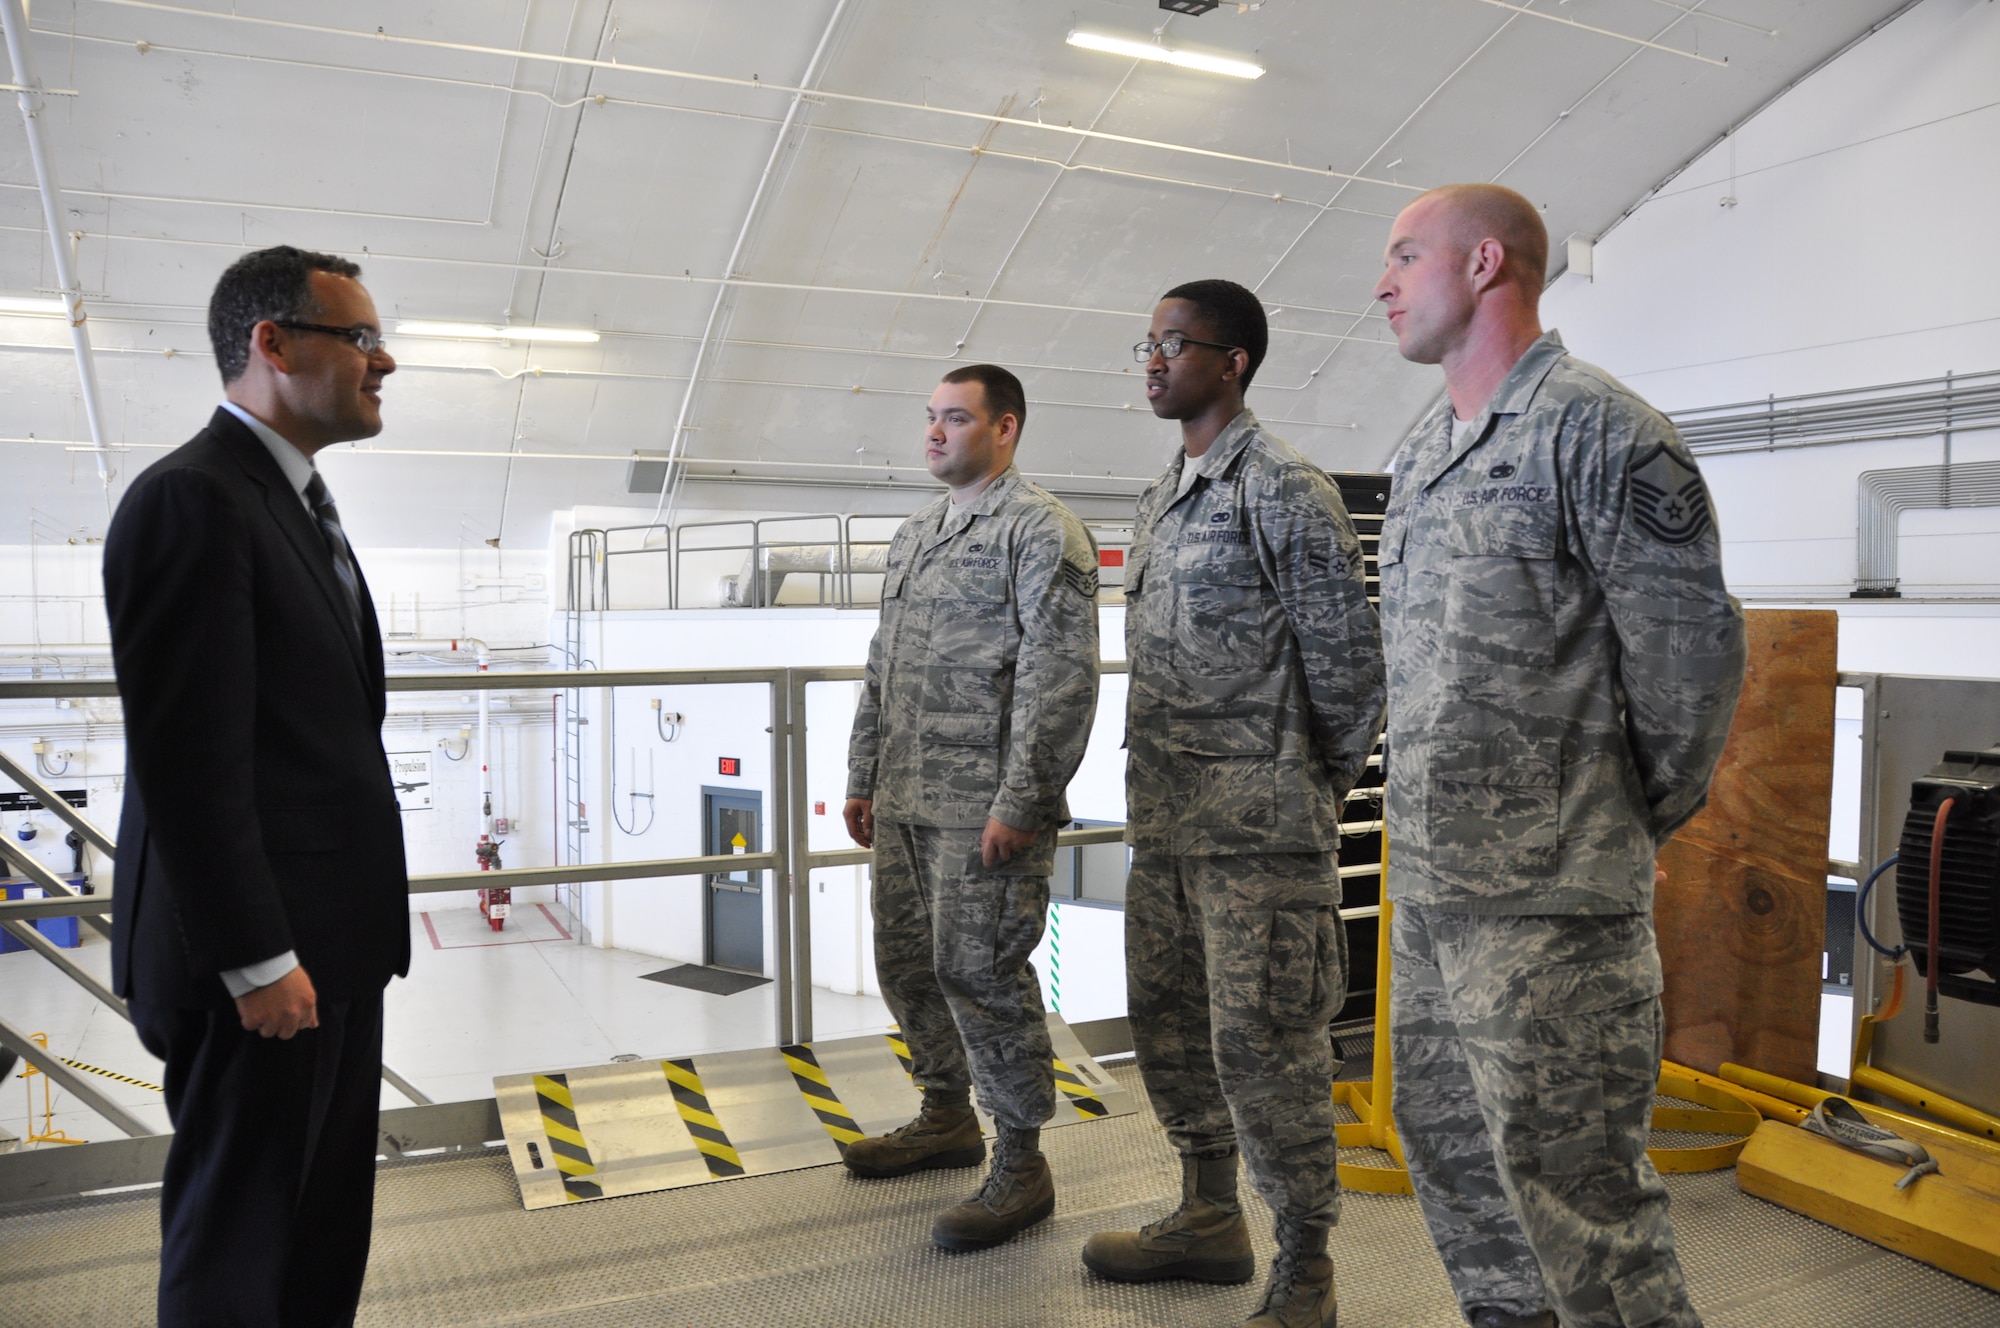 Mr. Daniel Ginsberg, Assistant Secretary of the Air Force for Manpower and Reserve Affairs, Washington, D.C., chats with Airmen from the 459th Aircraft Maintenance Squadron during a visit to the 459th Air Refueling Wing at Joint Base Andrews, Md., May 17, 2013. Ginsberg visited the wing to interact with the Airmen and answer questions regarding manpower issues. (U.S. Air Force photo/ Staff Sgt. Katie Spencer)